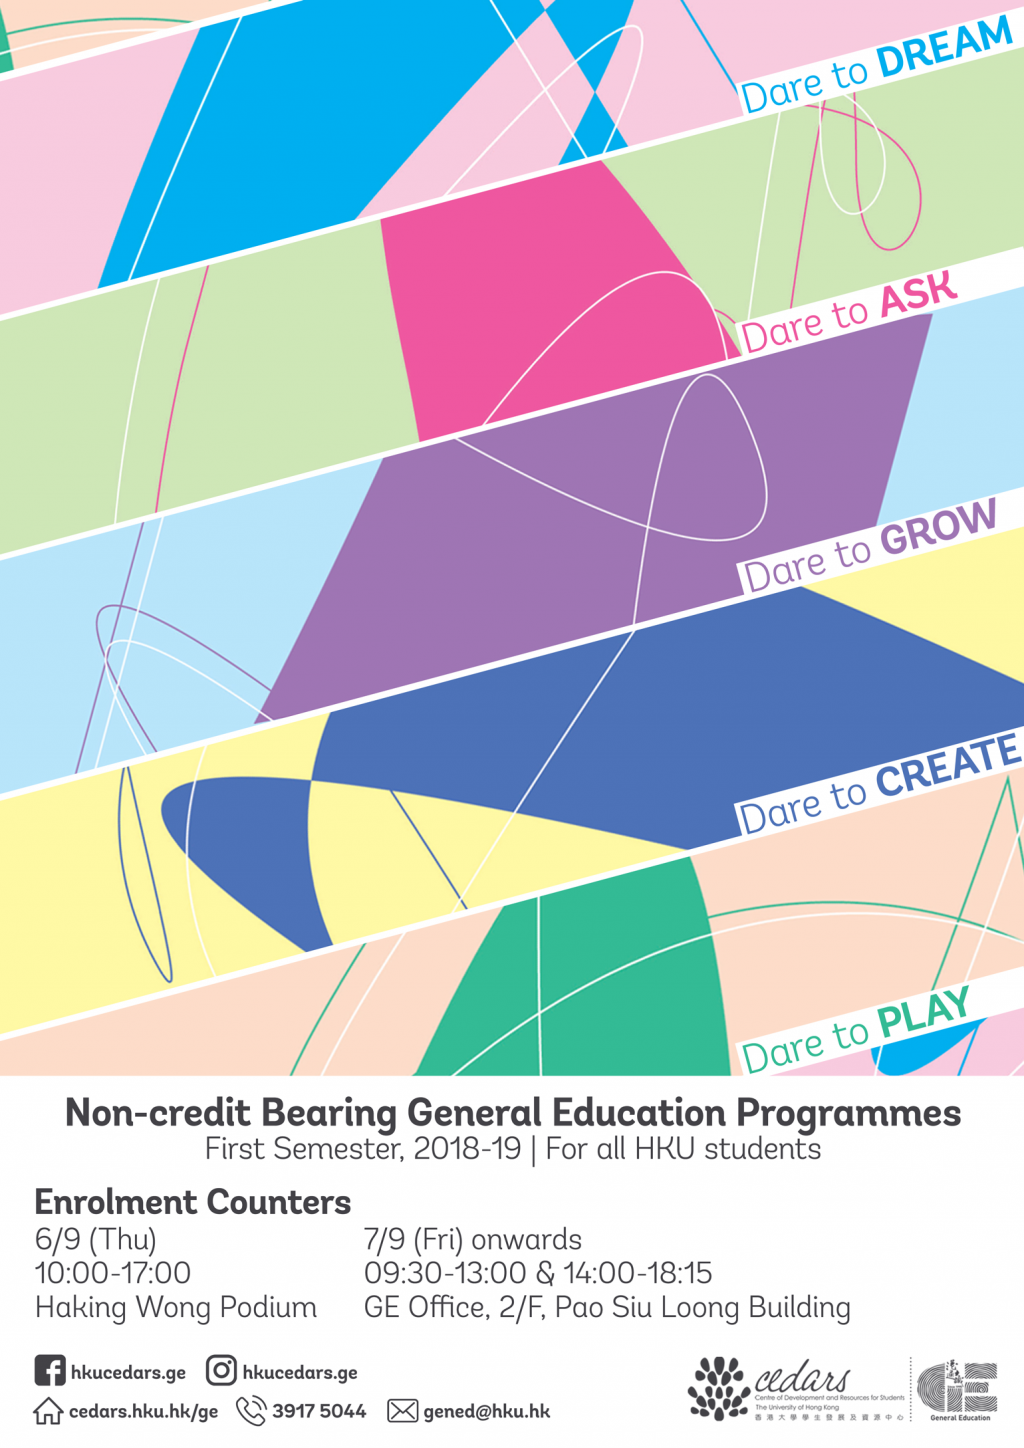 Non-credit Bearing General Education Programmes for the First Semester, 2018 - 2019